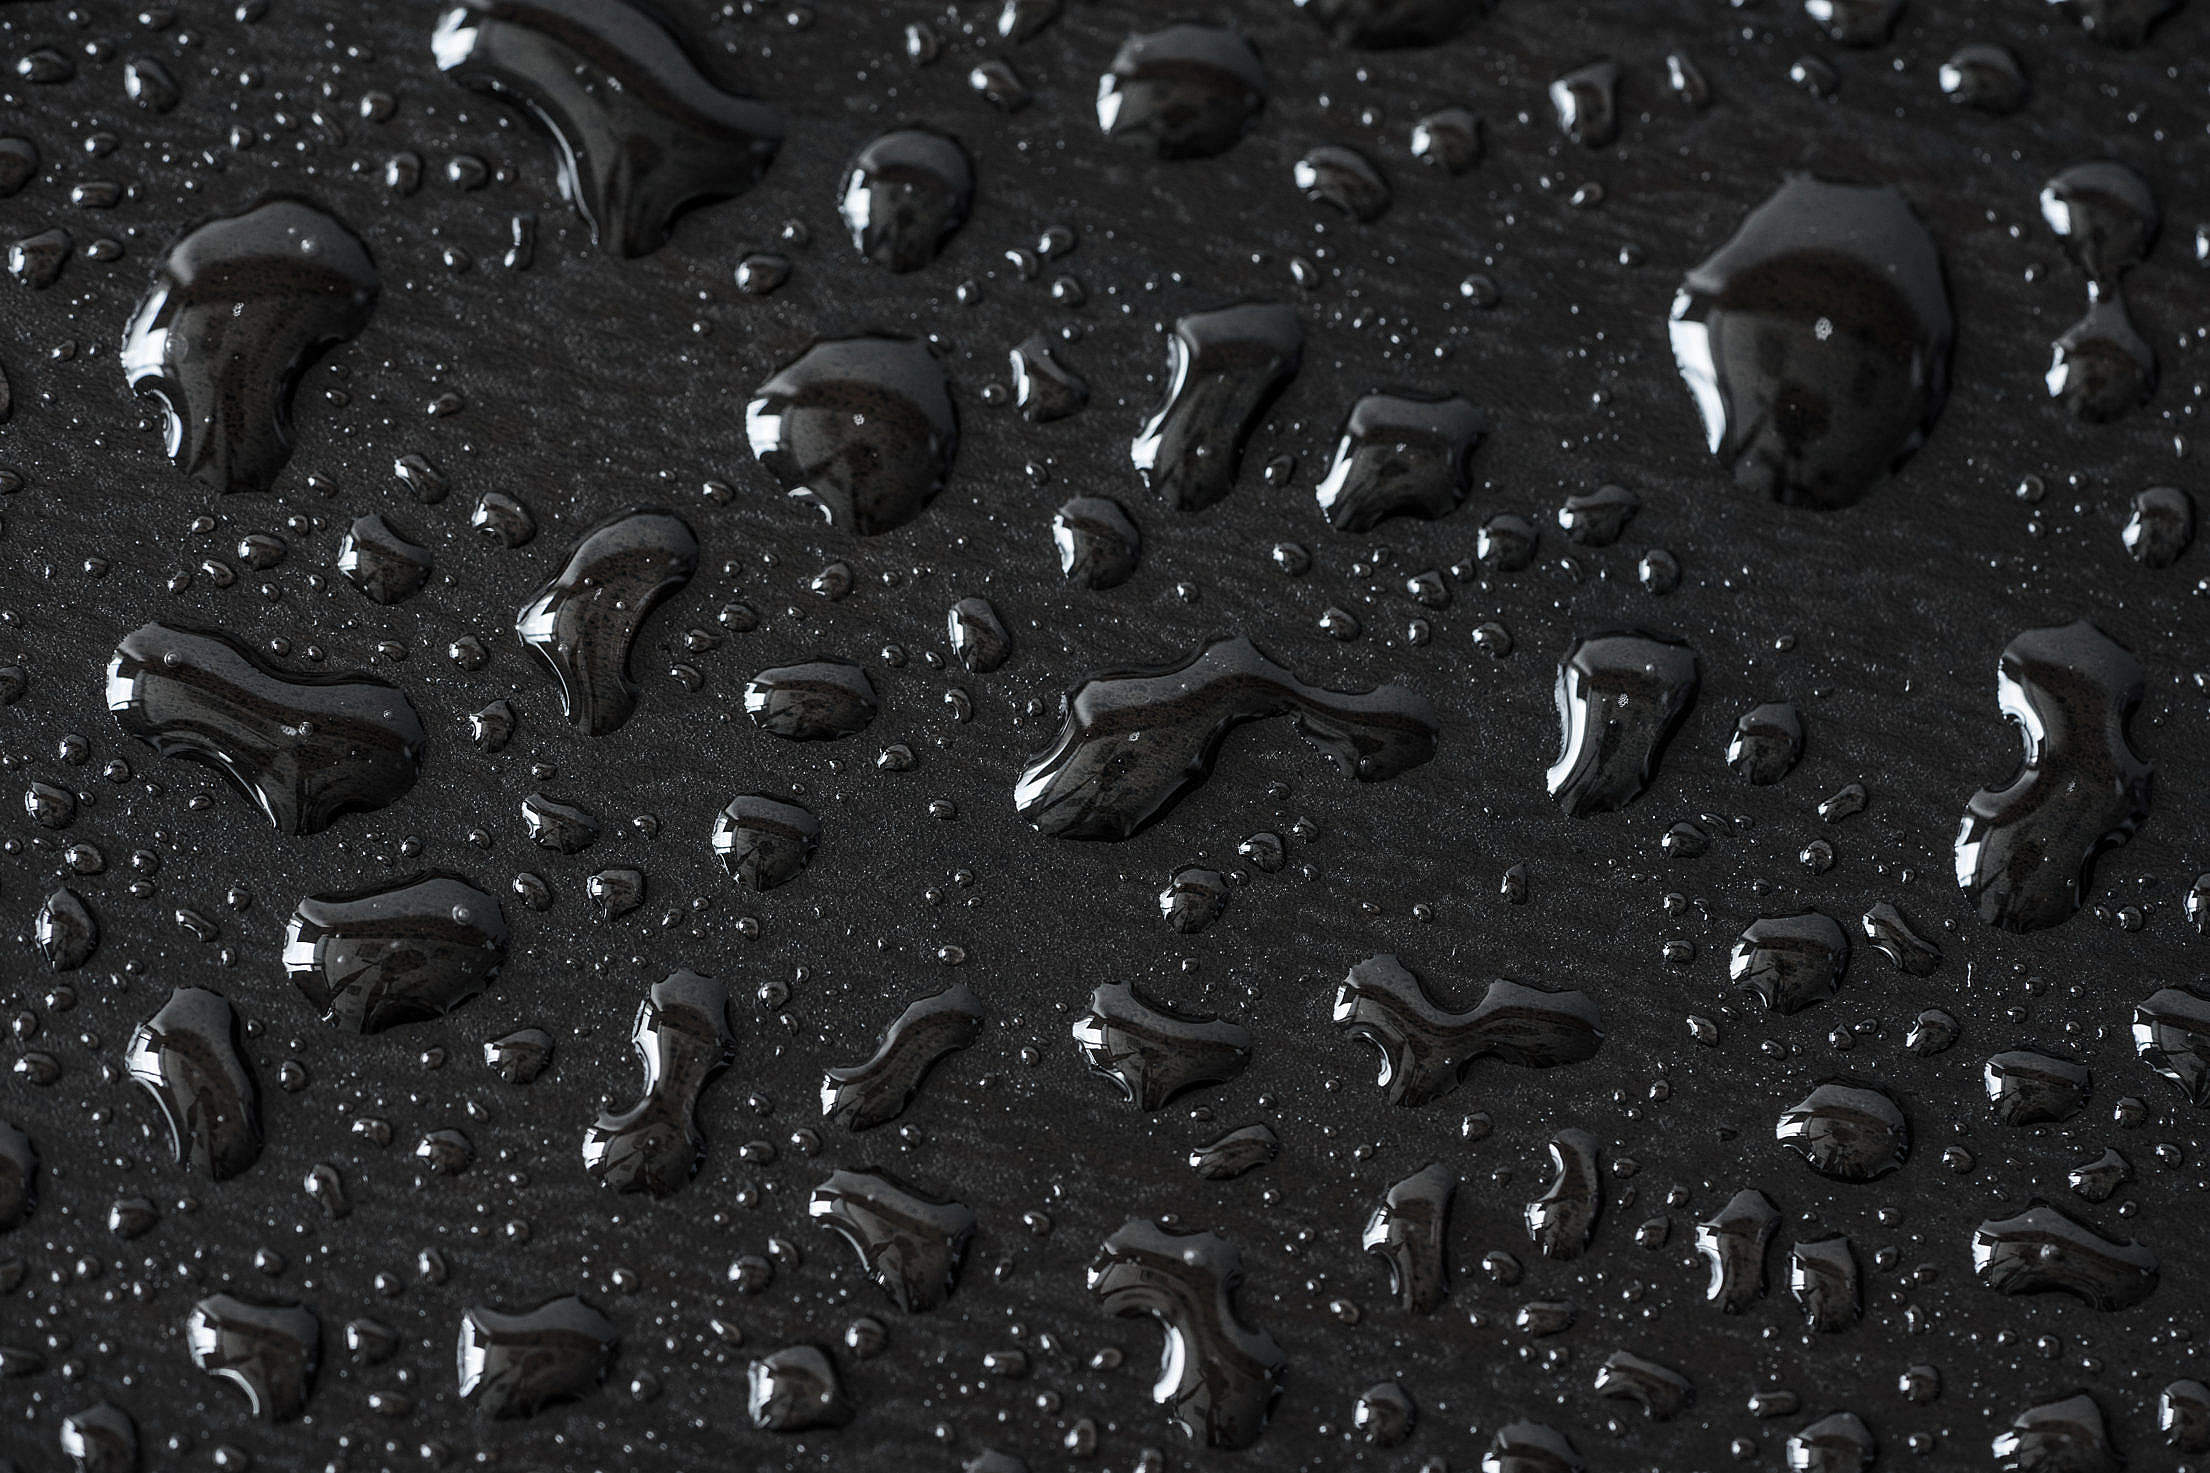 Black Water Drops Abstract Background Pattern #2 Free Stock Photo ...